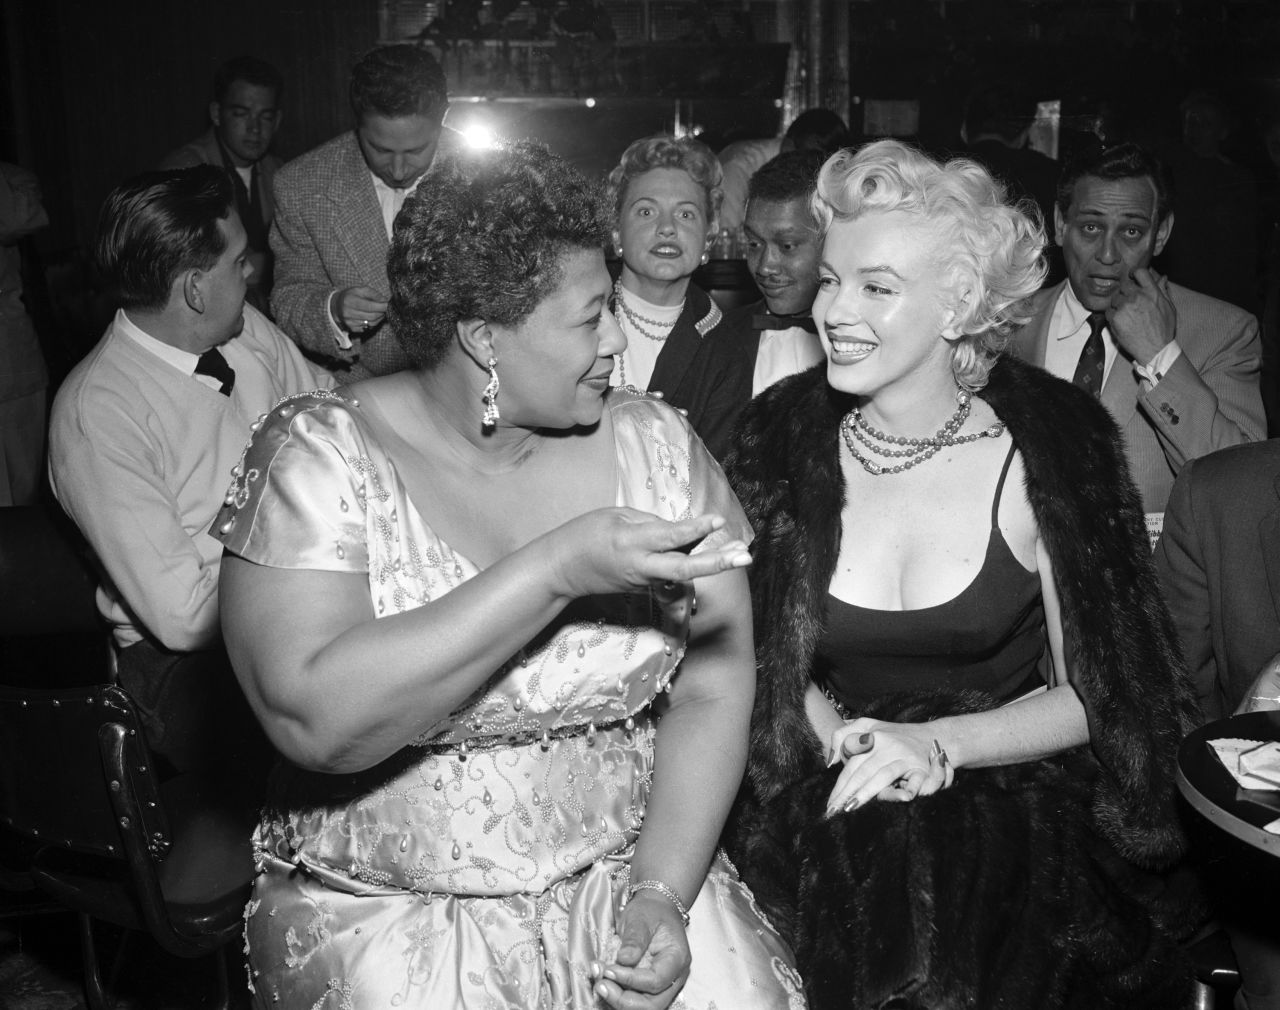 Monroe is seen with singer Ella Fitzgerald at the Tiffany Club in Hollywood, California, in 1954. "My very favorite person, and I love her as a person as well as a singer, I think she's the greatest, and that's Ella Fitzgerald," said Monroe.